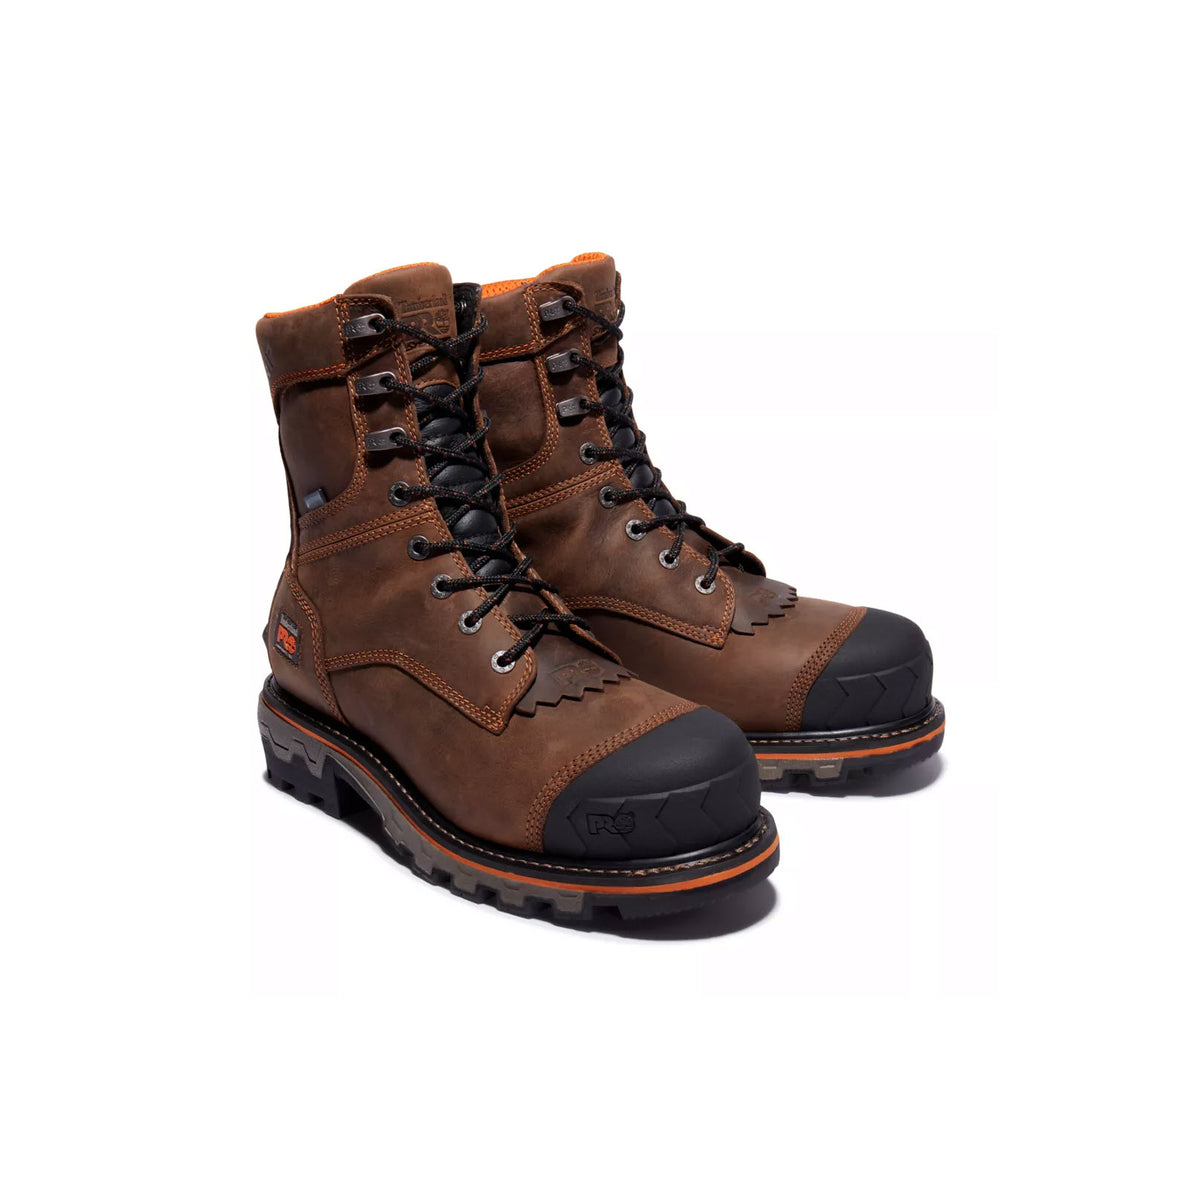 A pair of Timberland Pro Boondock HD Comp Toe Logger brown safety-toe work boots with black soles on a white background.